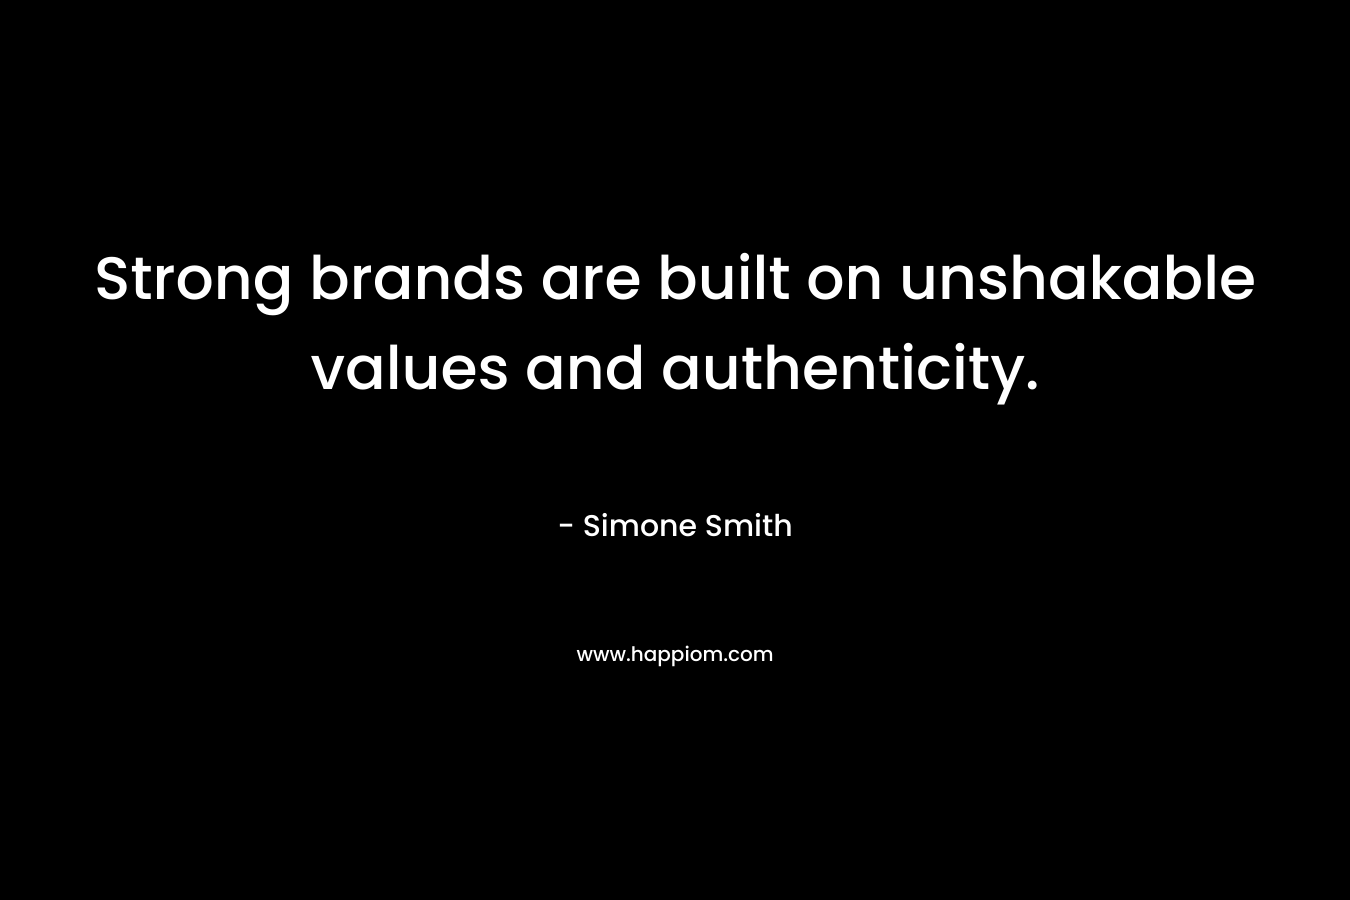 Strong brands are built on unshakable values and authenticity. – Simone Smith